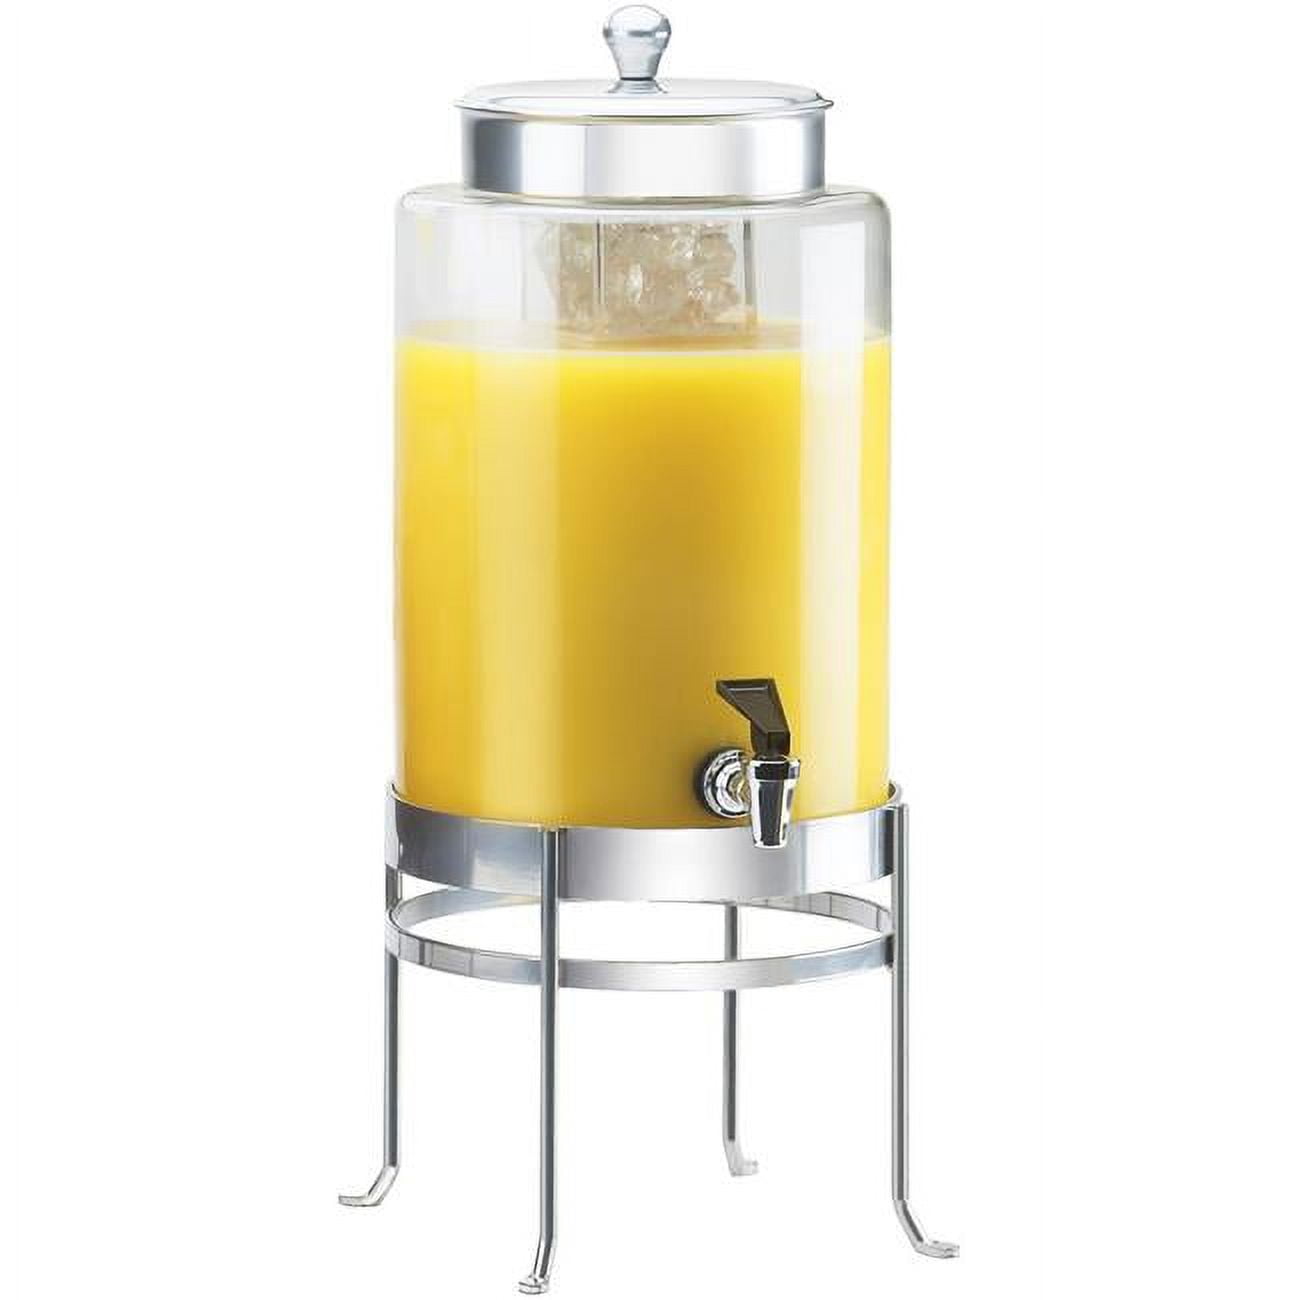 Picture of Cal Mil 1580-2INF-74 2 gal Silver Soho Glass Beverage Dispenser with Infusion Chamber - 10 x 12 x 20.5 in.